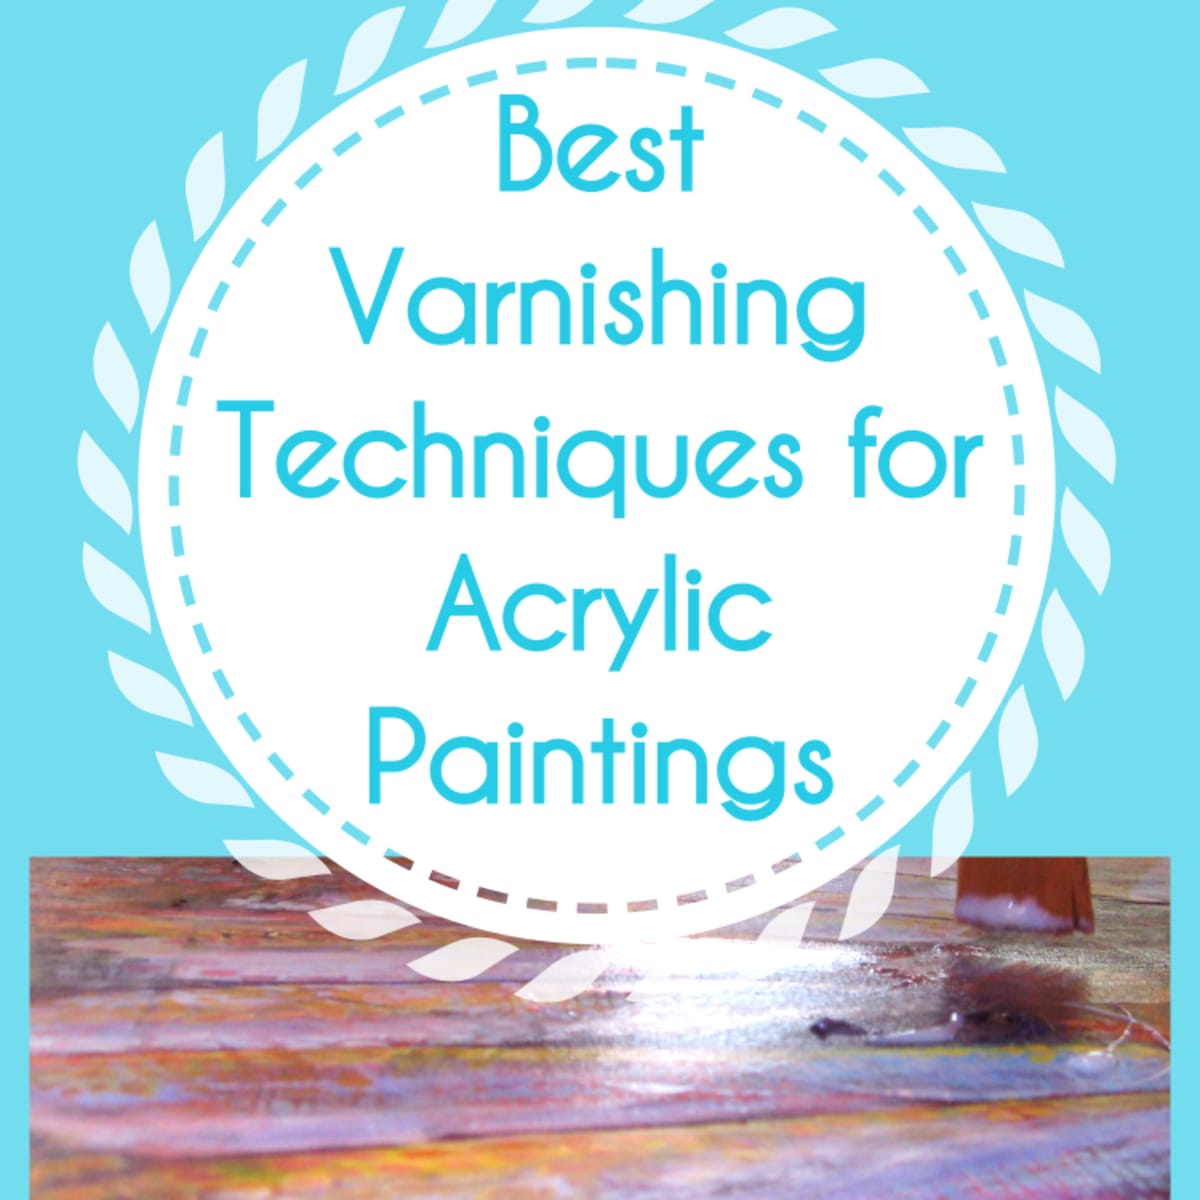 How to Use Iridescent Medium to Make Your Acrylic Paintings Pop